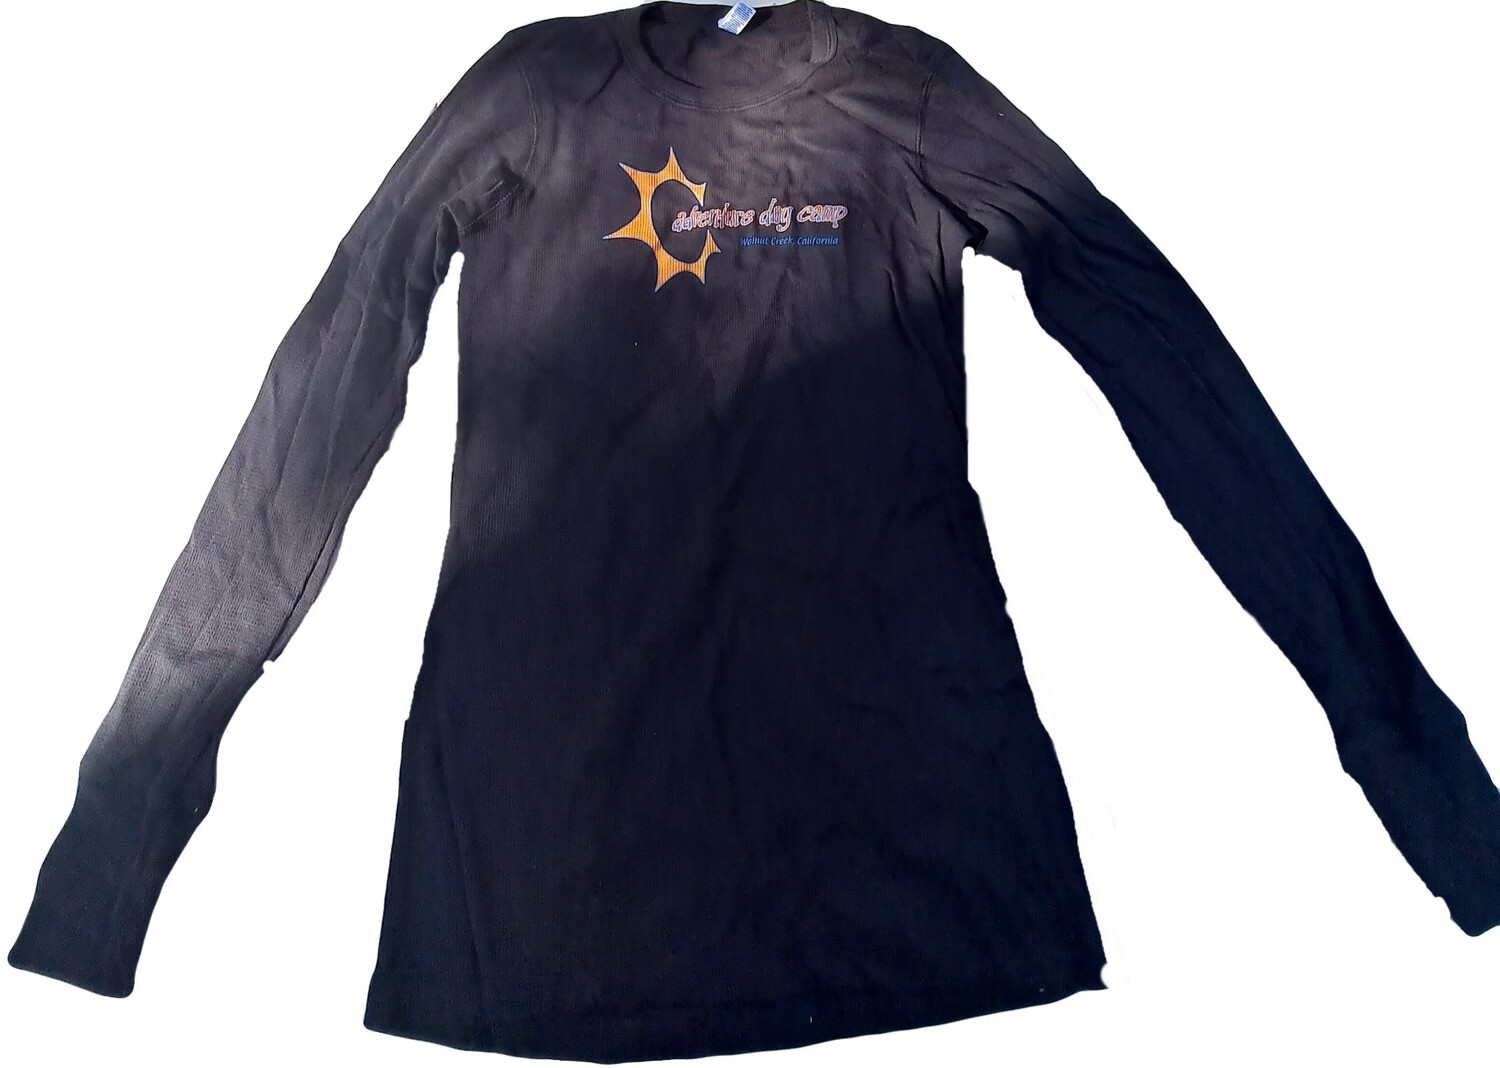 Adult Size Long Sleeve Thermal Shirt